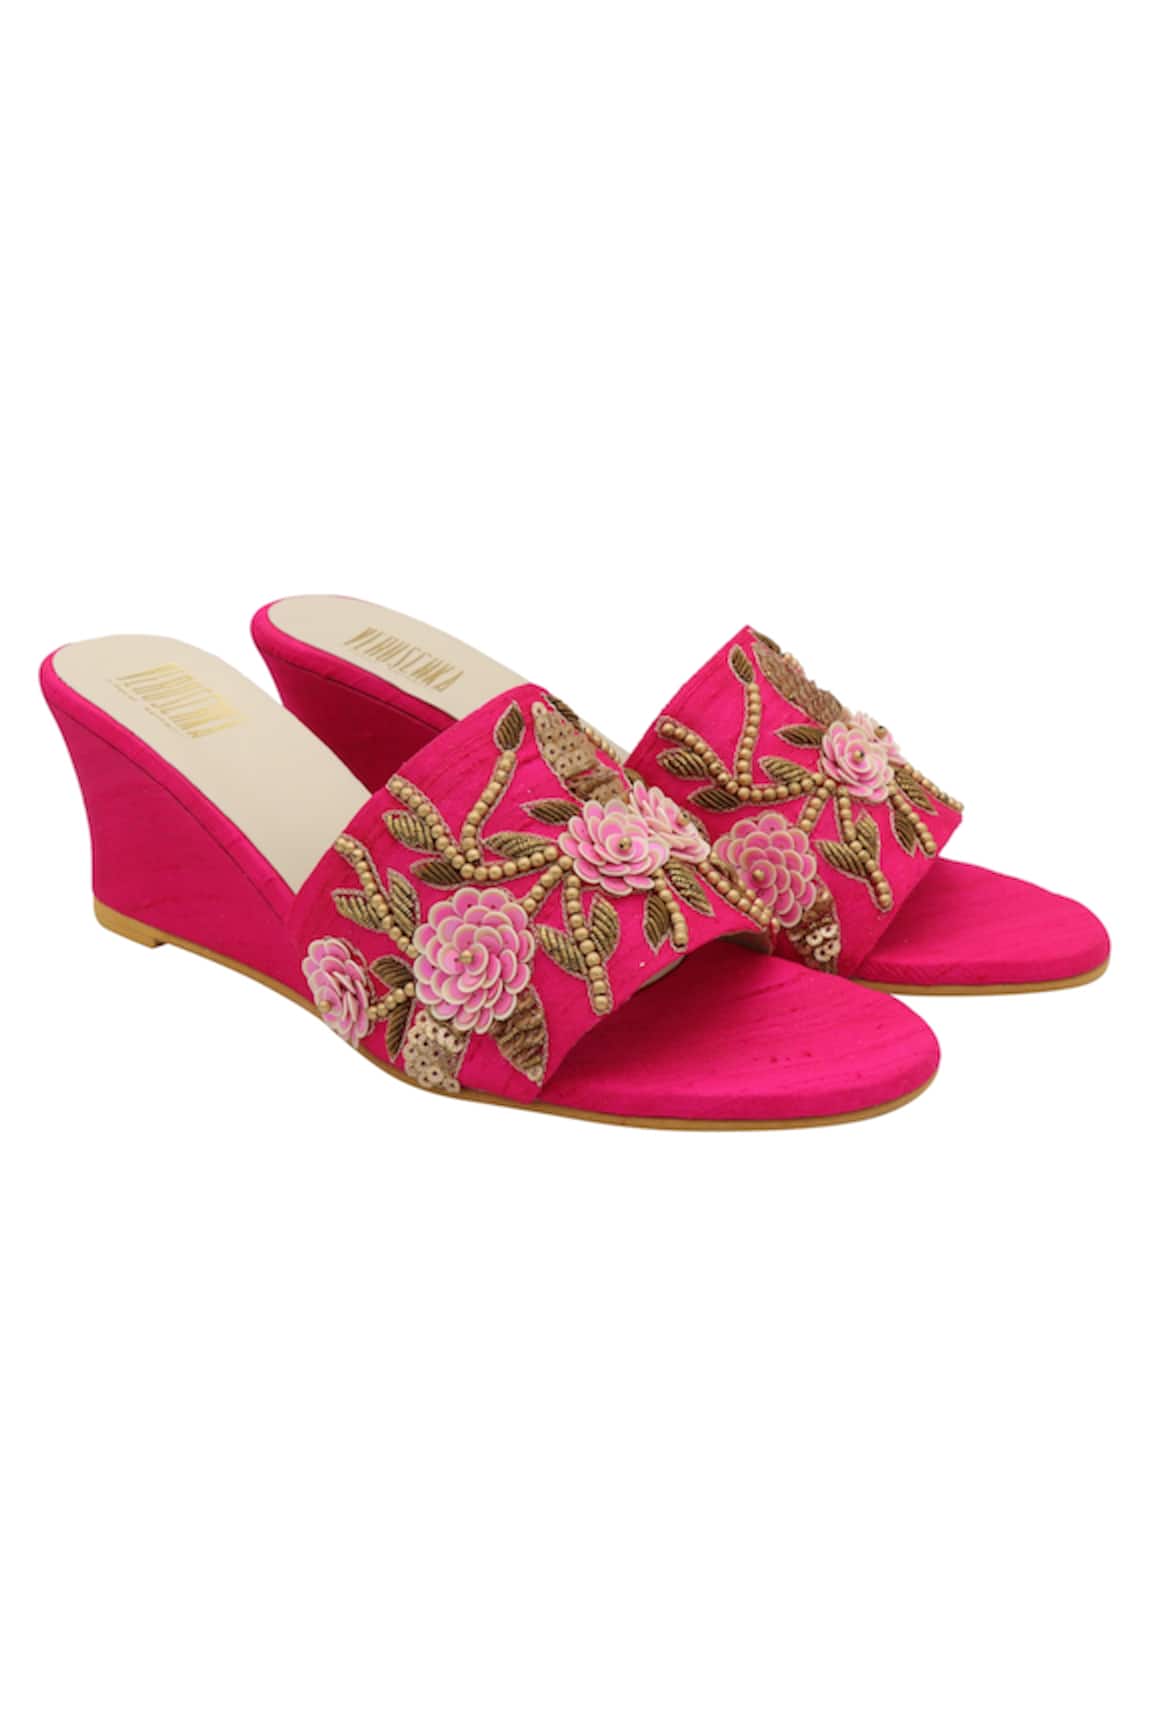 Veruschka by Payal Kothari Floral Embroidered Wedges